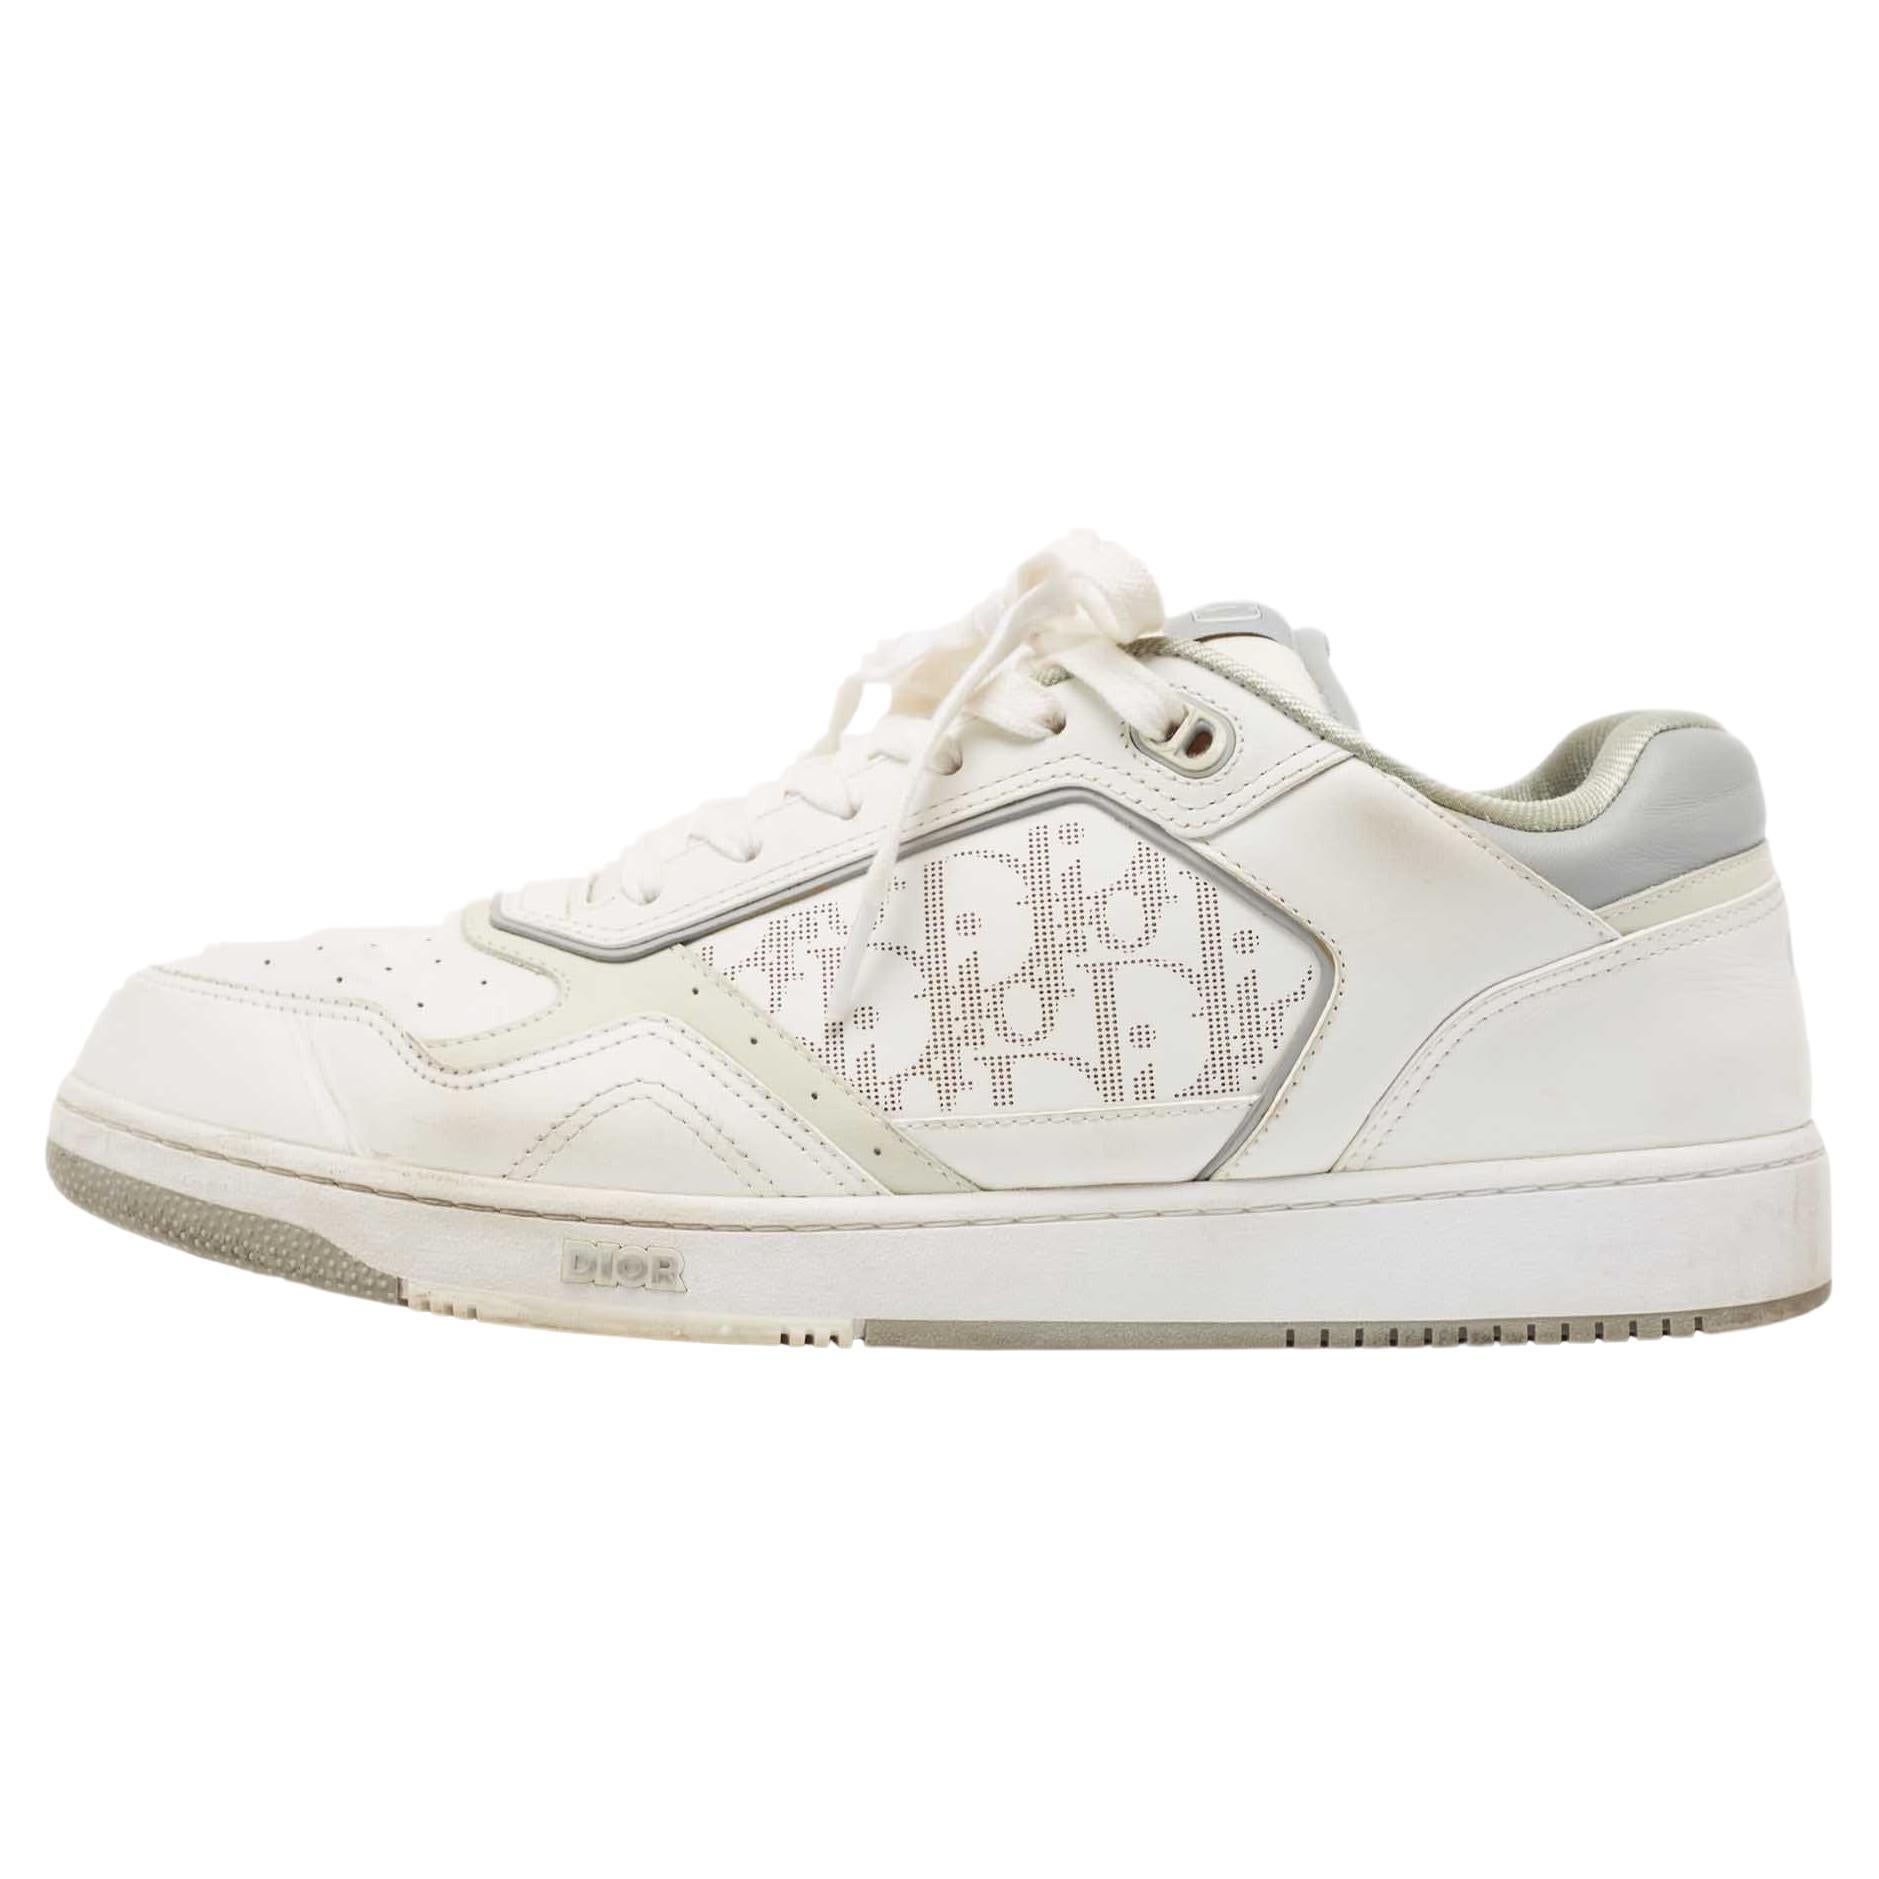 Dior White/Grey Leather B27 Low Top Sneakers Size 46 For Sale